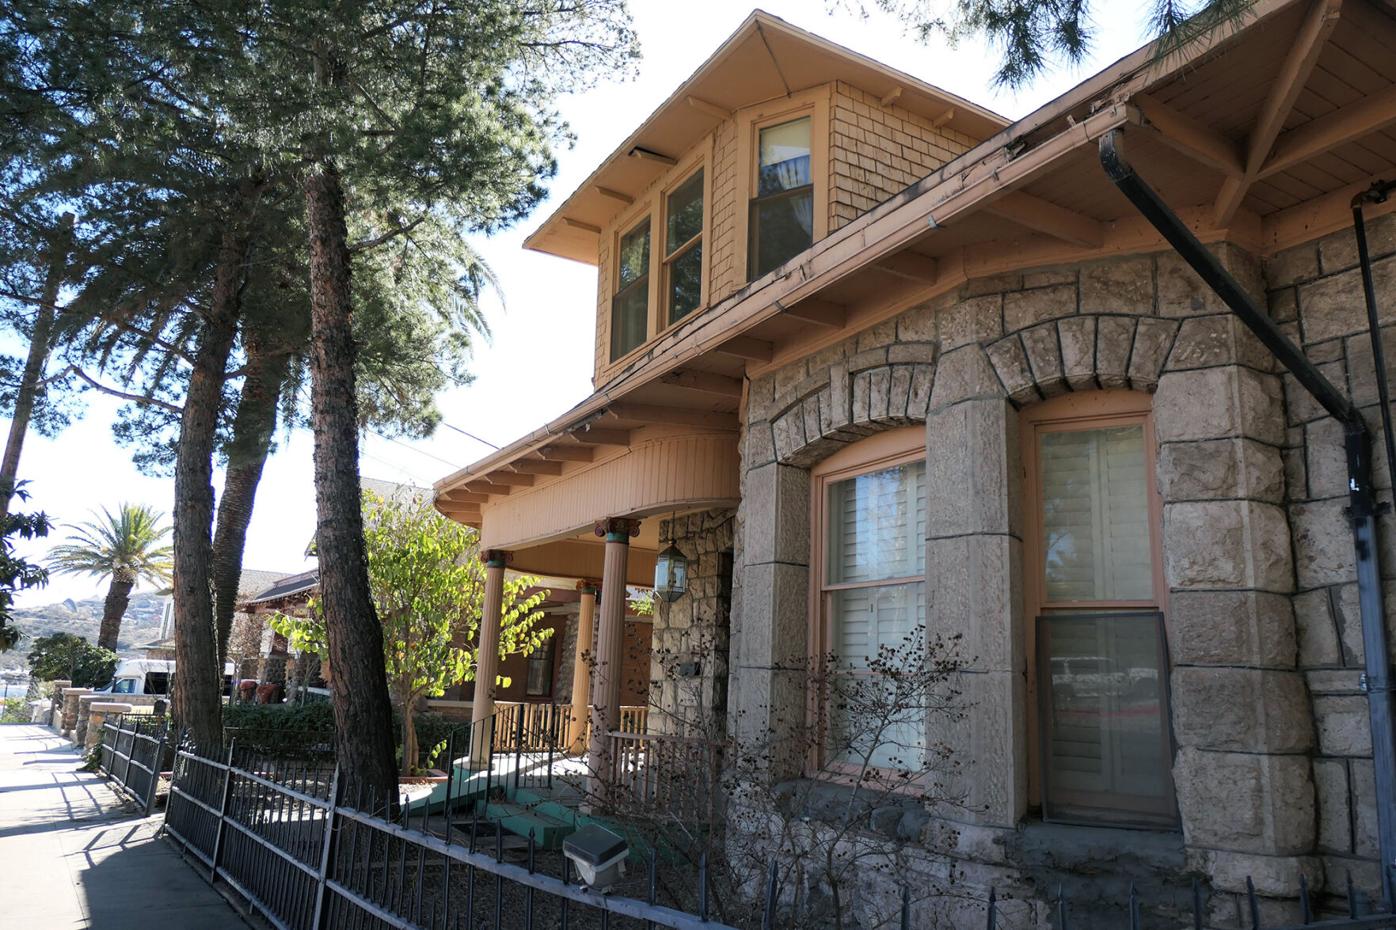 UA to sell historic Castro House, Local News Stories